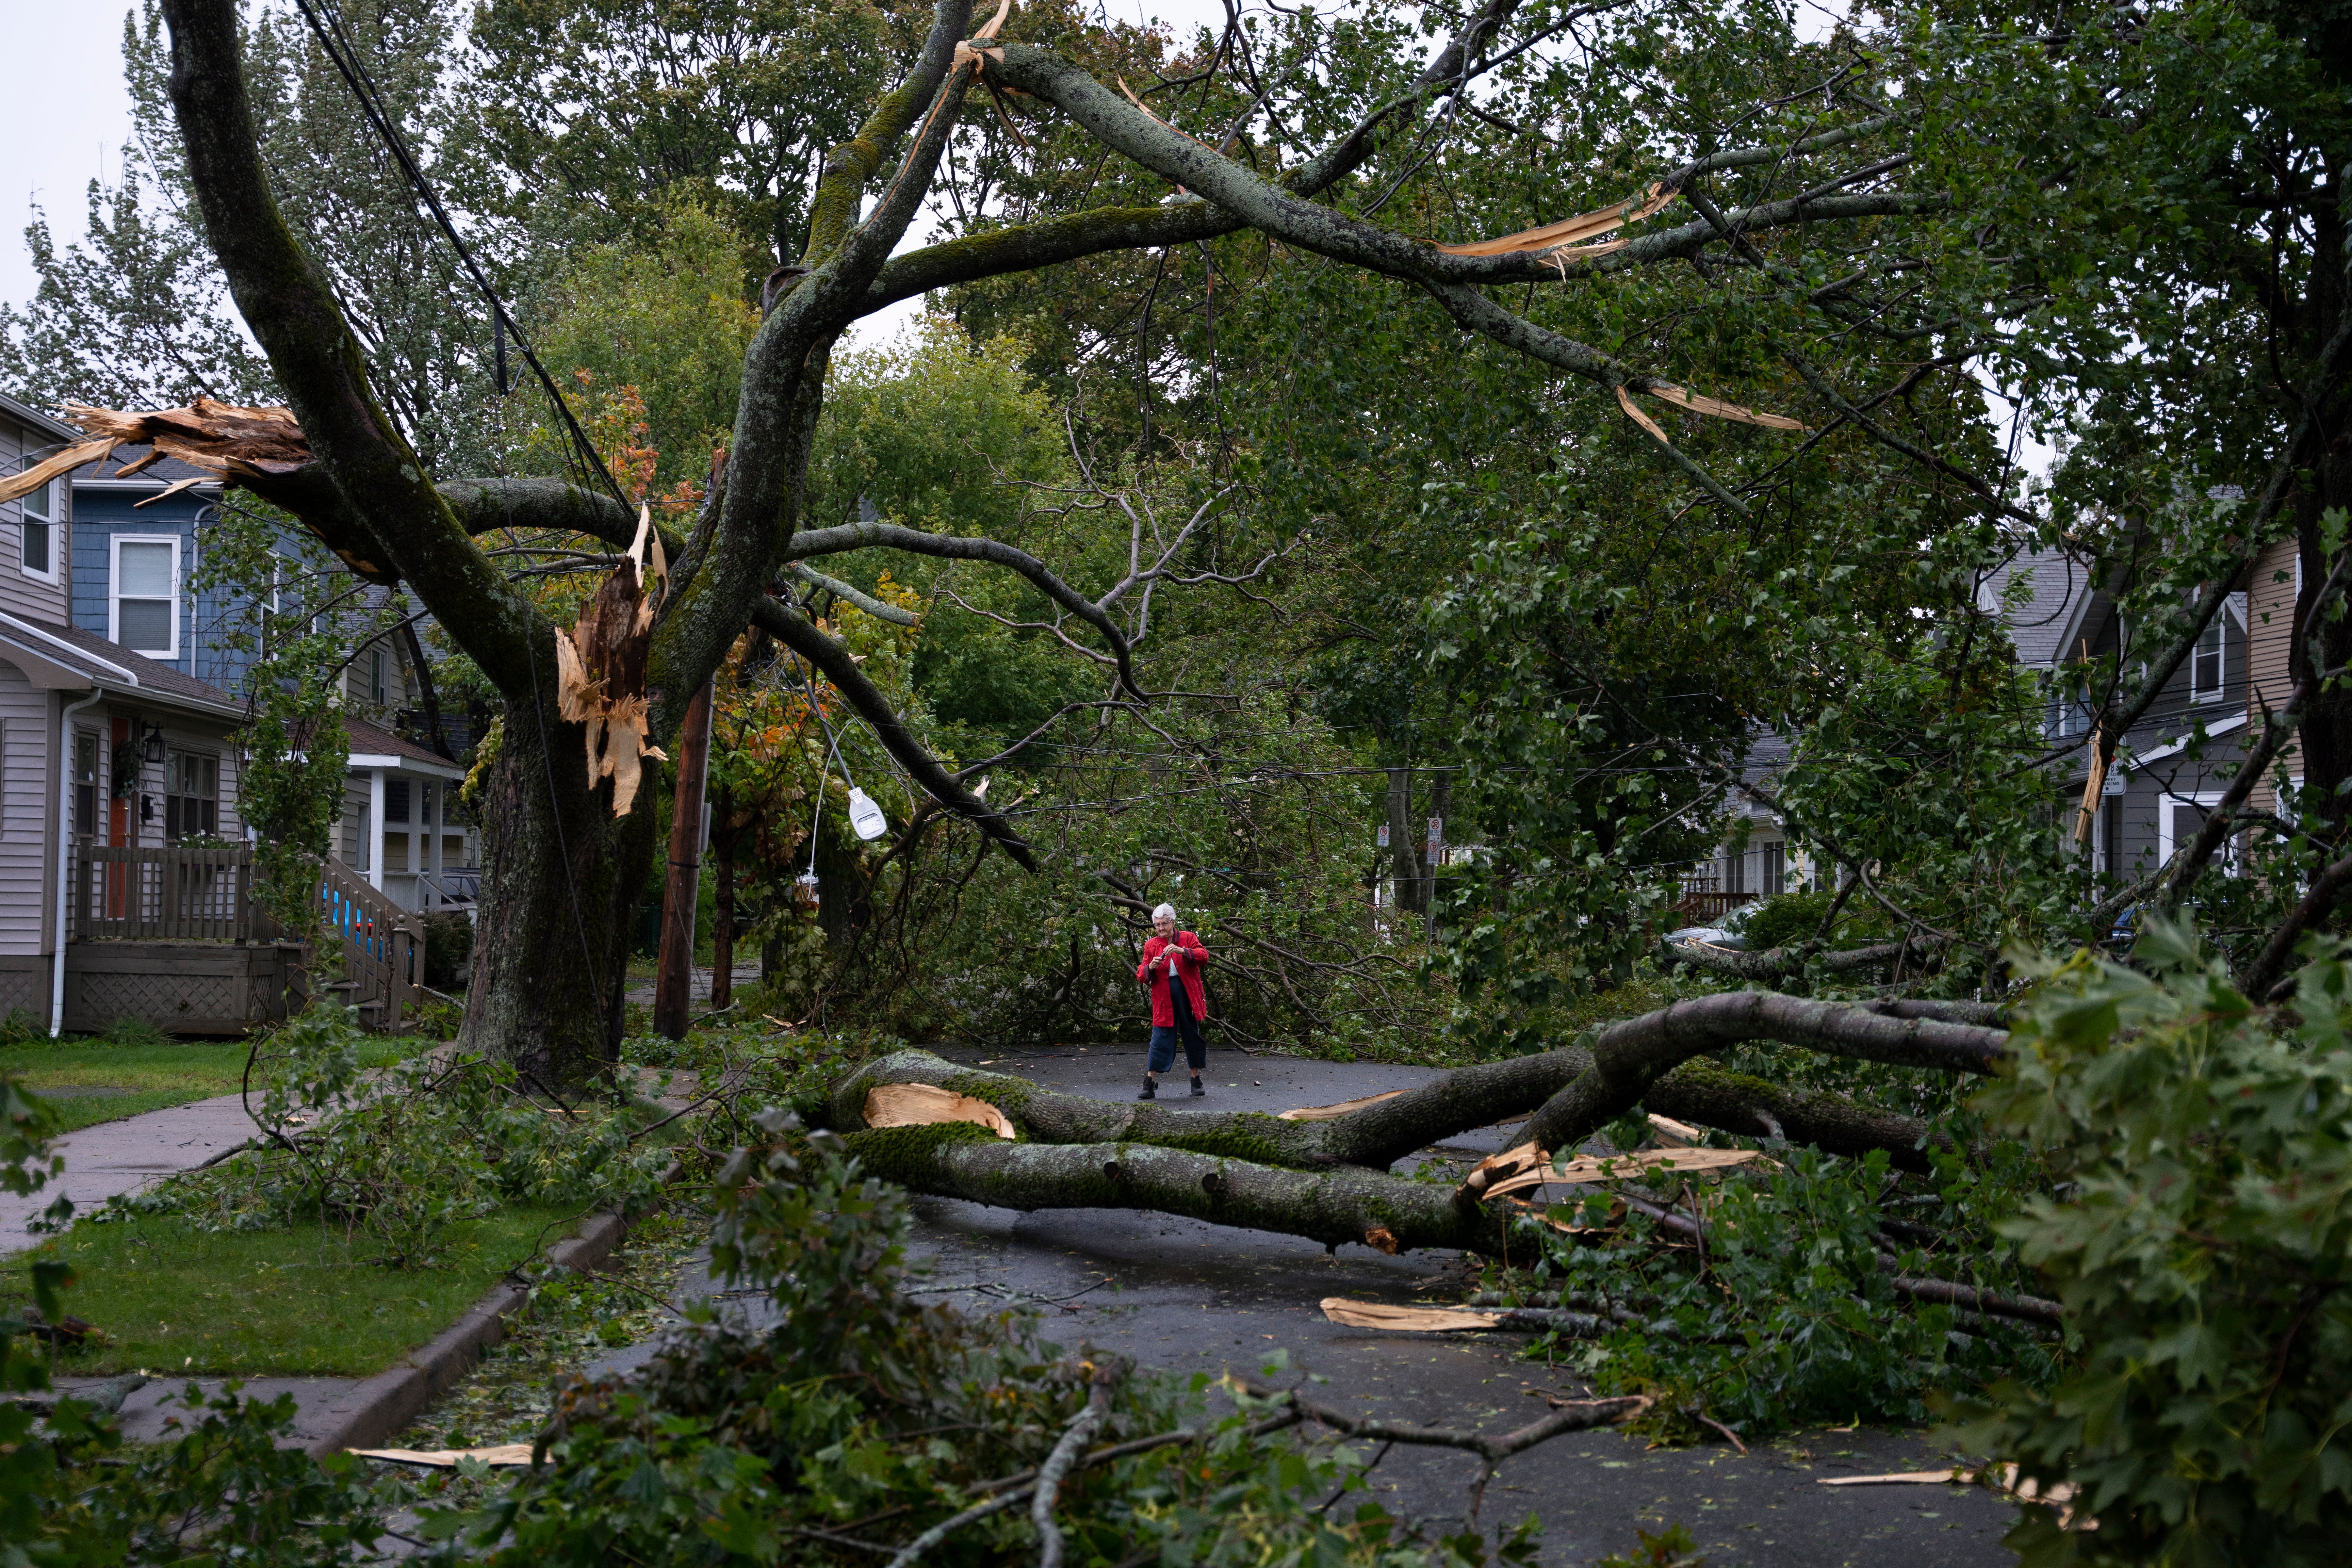 Georgina Scott surveys the damage on her street in Halifax as post tropical storm Fiona continues to batter the area on Saturday